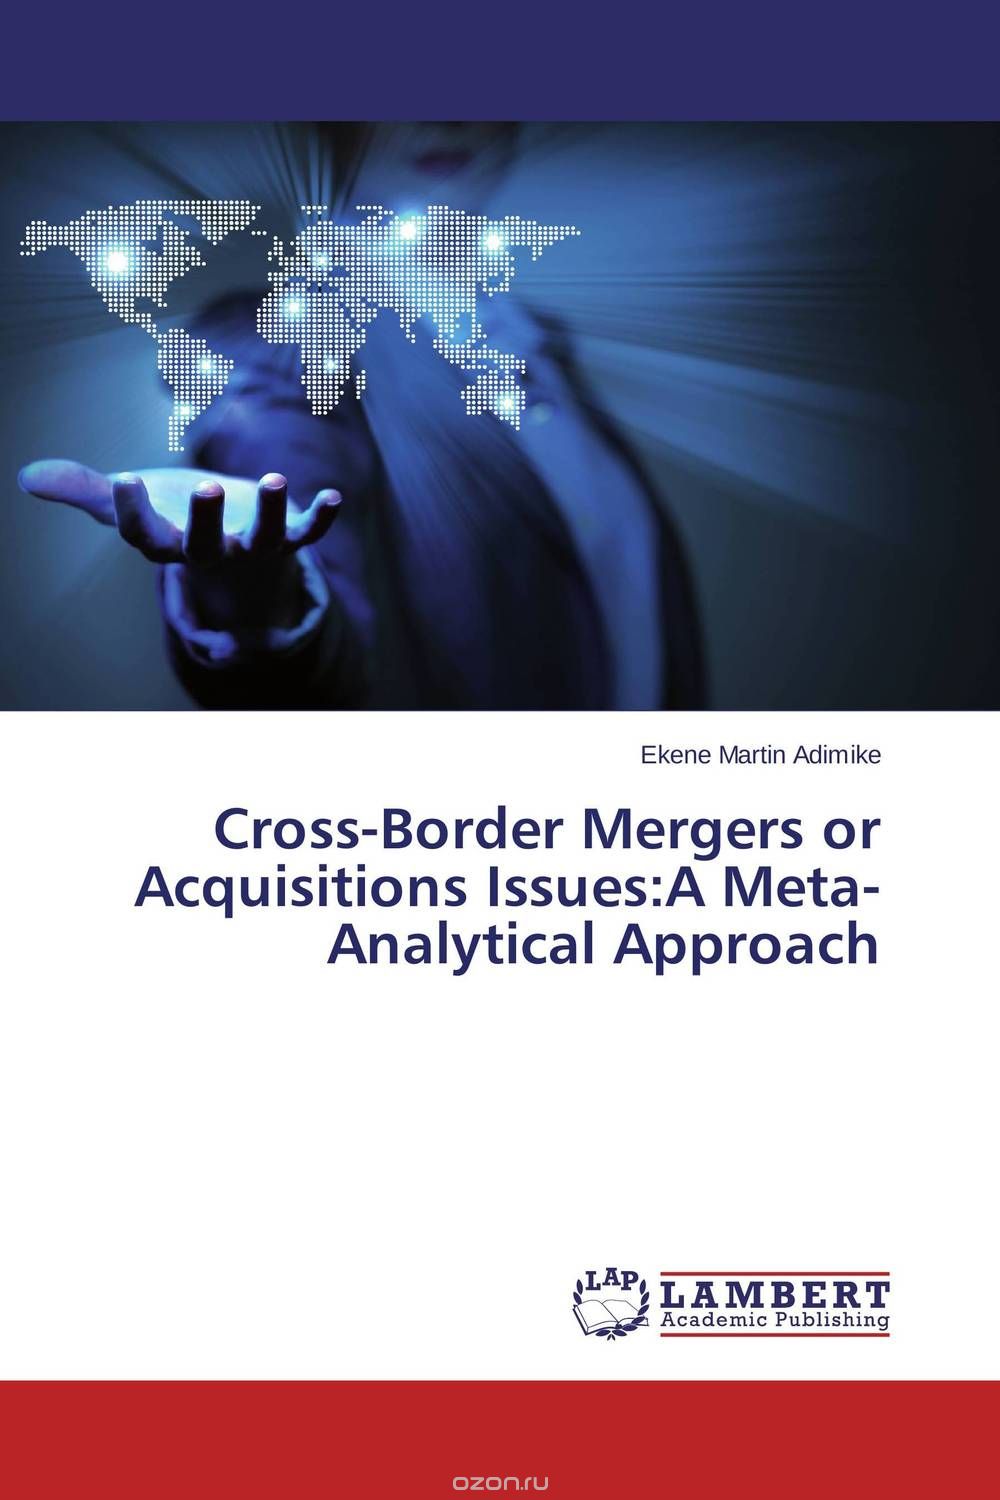 Cross-Border Mergers or Acquisitions Issues:A Meta-Analytical Approach